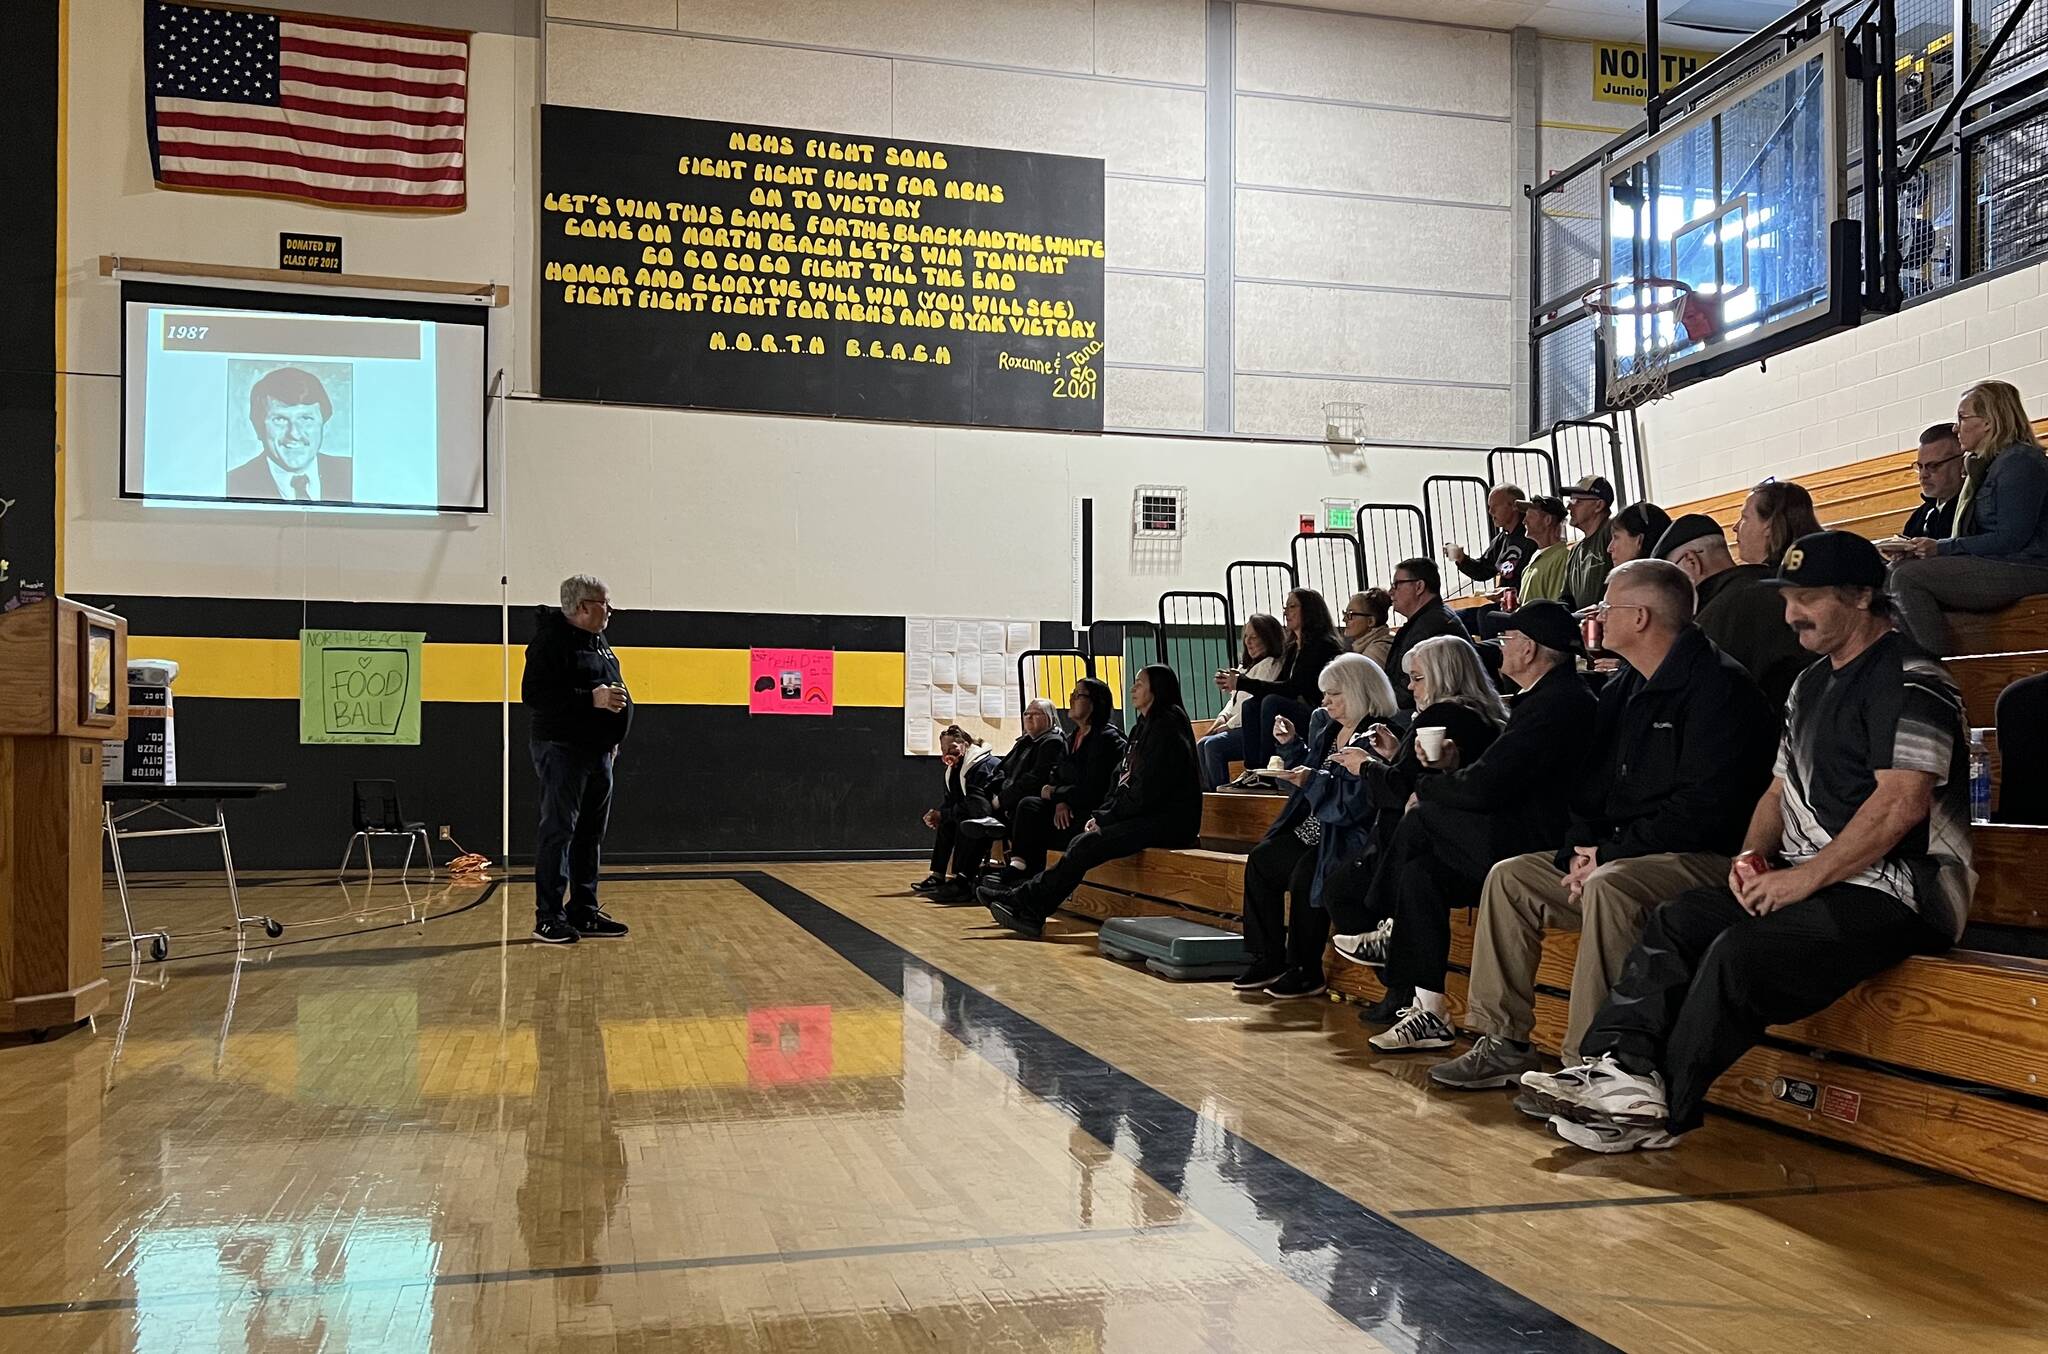 Former North Beach High School students gathered at the school Saturday to share memories of former principal Mike Duffy, who passed away last month. Duffy's picture is displayed on the projector. (Clayton Franke / The Daily World)